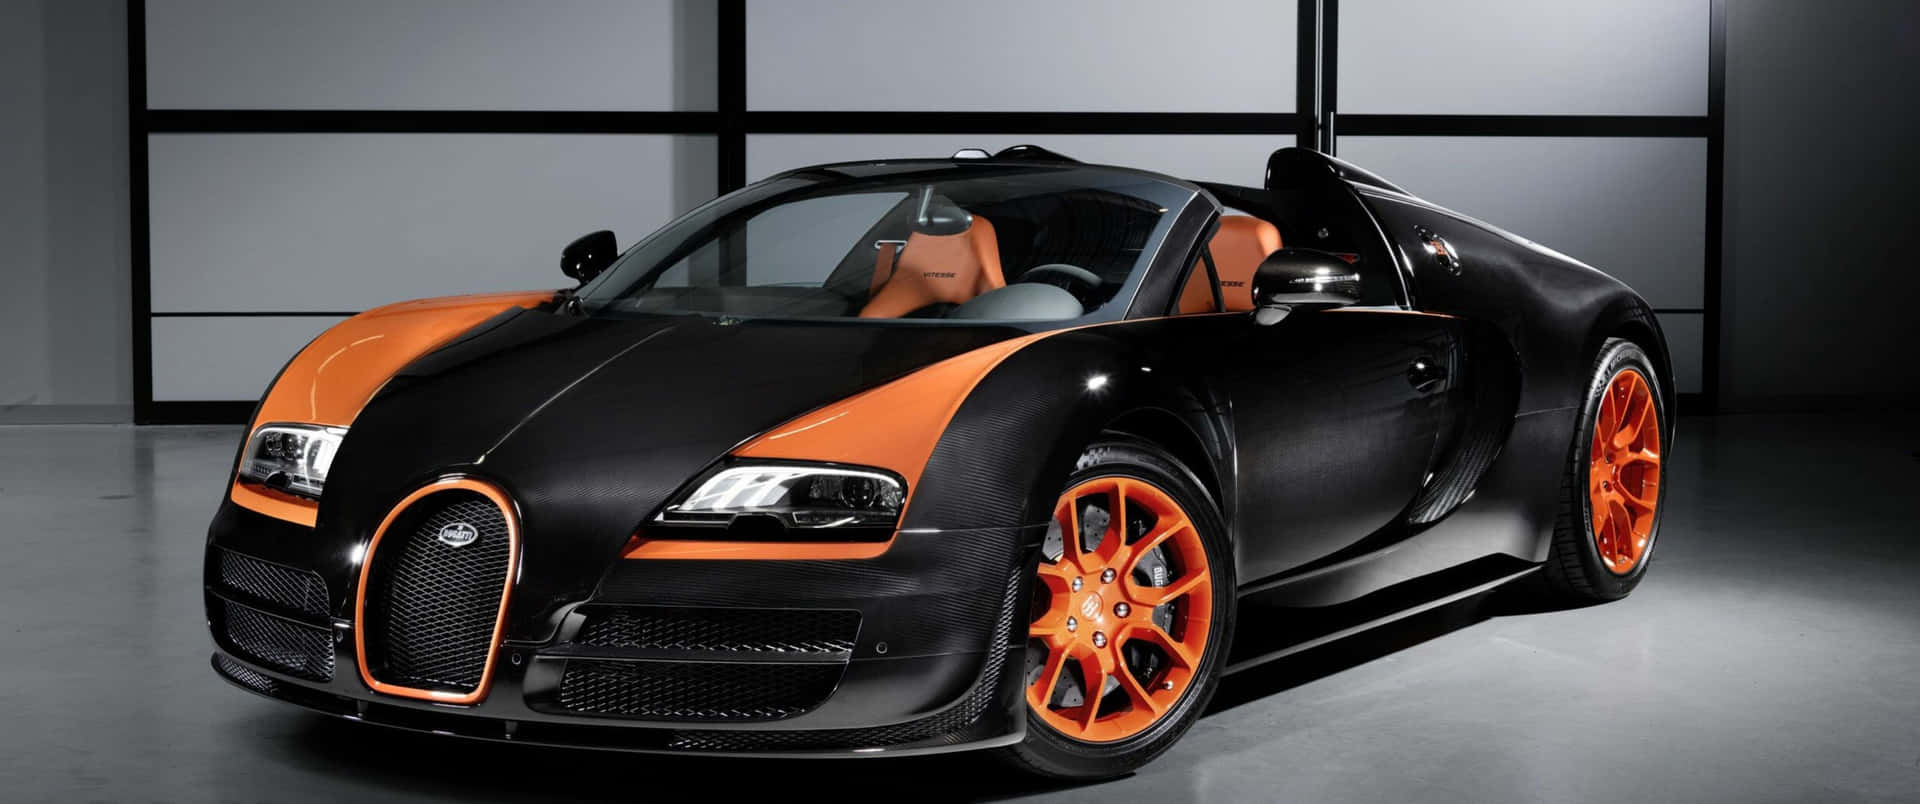 Experience the thrill of driving a Bugatti with this 3440x1440p Wallpaper